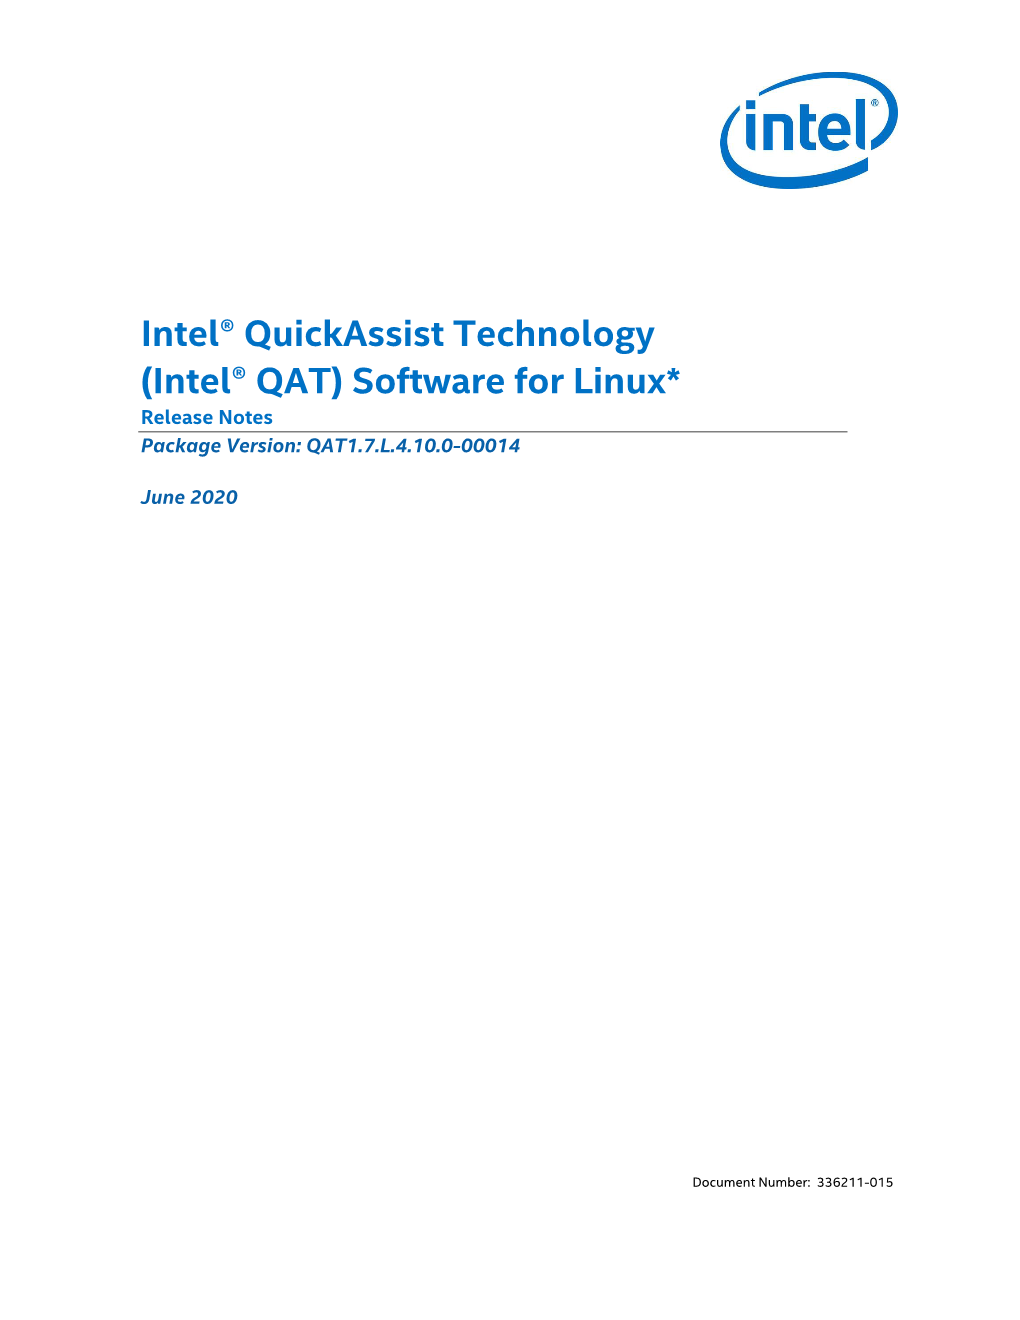 Intel® Quickassist Technology (Intel® QAT) Software for Linux* Release Notes Package Version: QAT1.7.L.4.10.0-00014